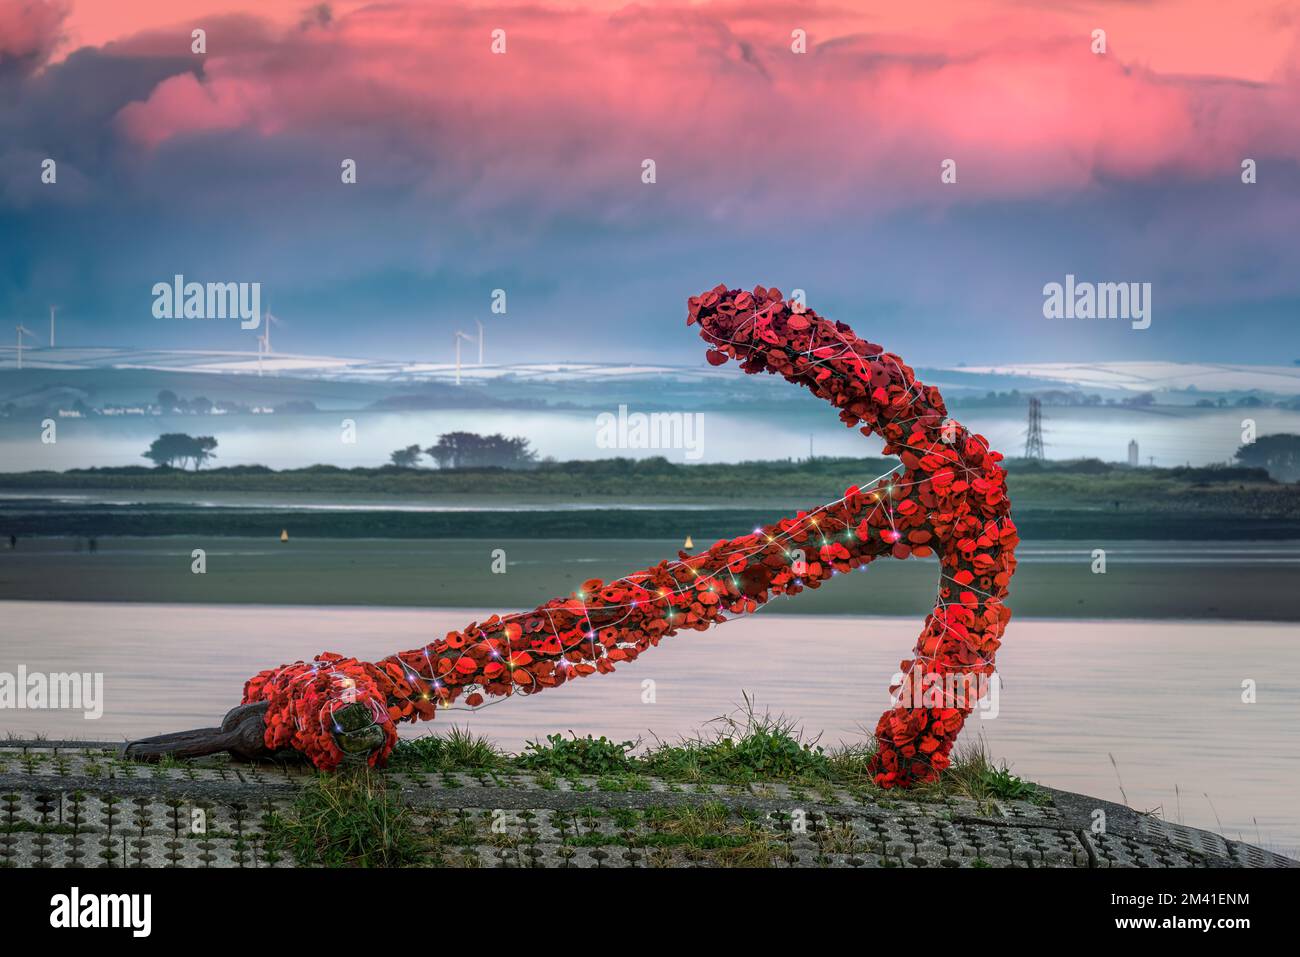 After a day of drifting mist and freezing temperatures in Appledore North Devon, the landmark Anchor on the quay, decorated with crocheted poppies and Stock Photo